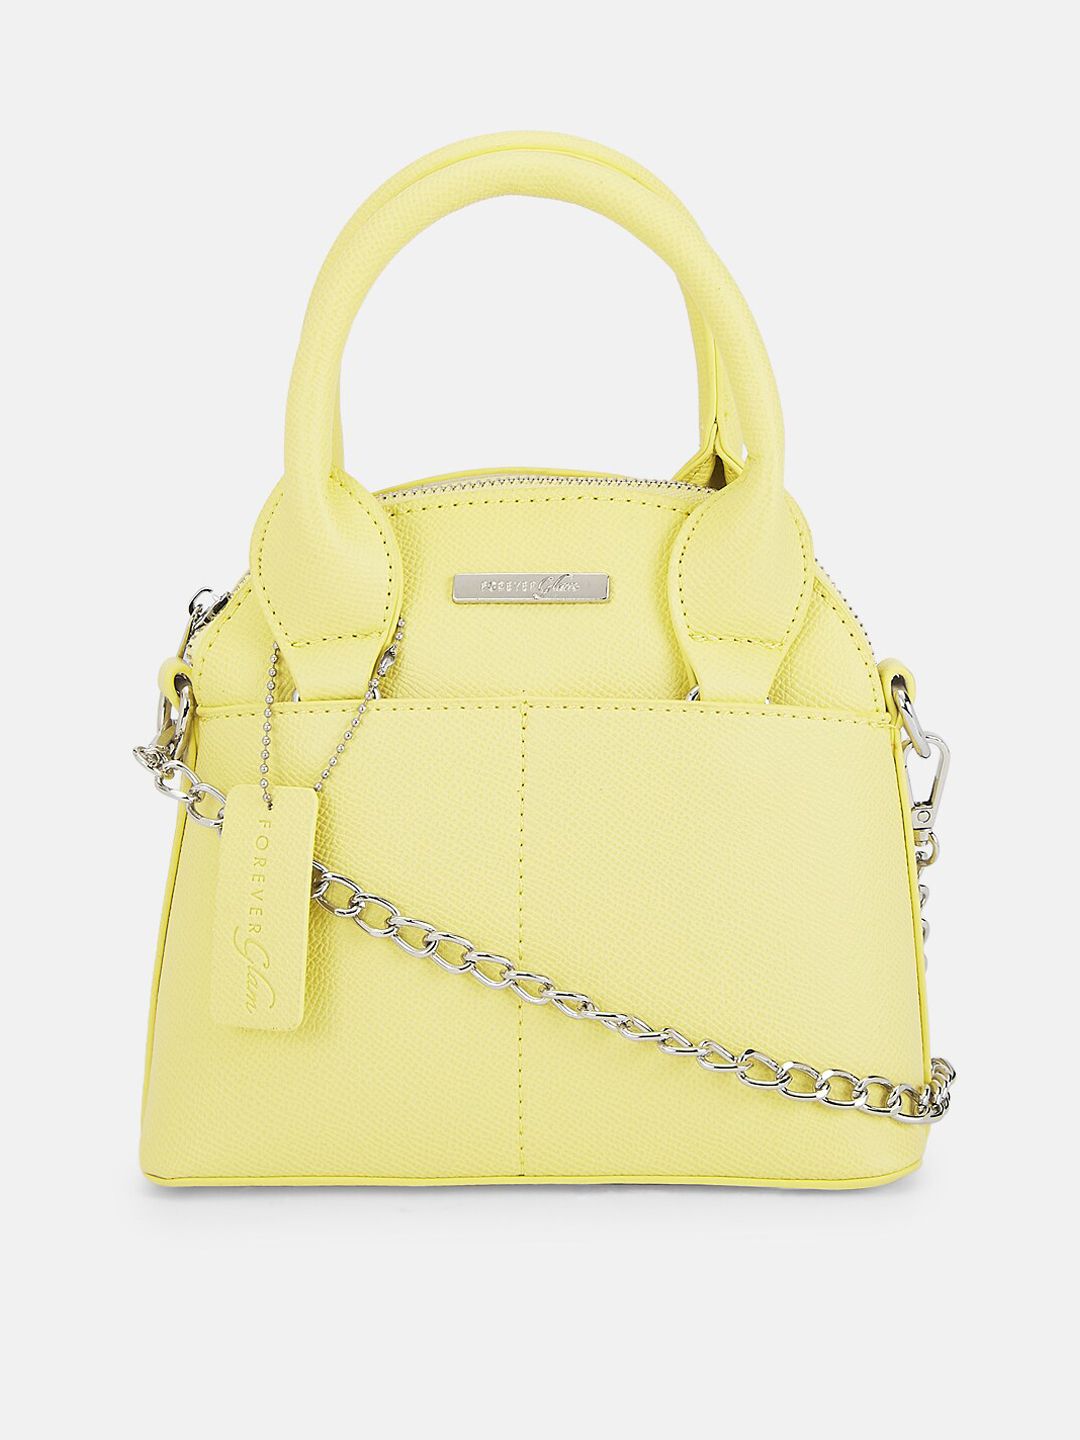 Forever Glam by Pantaloons Lime Green Structured Handheld Bag Price in India